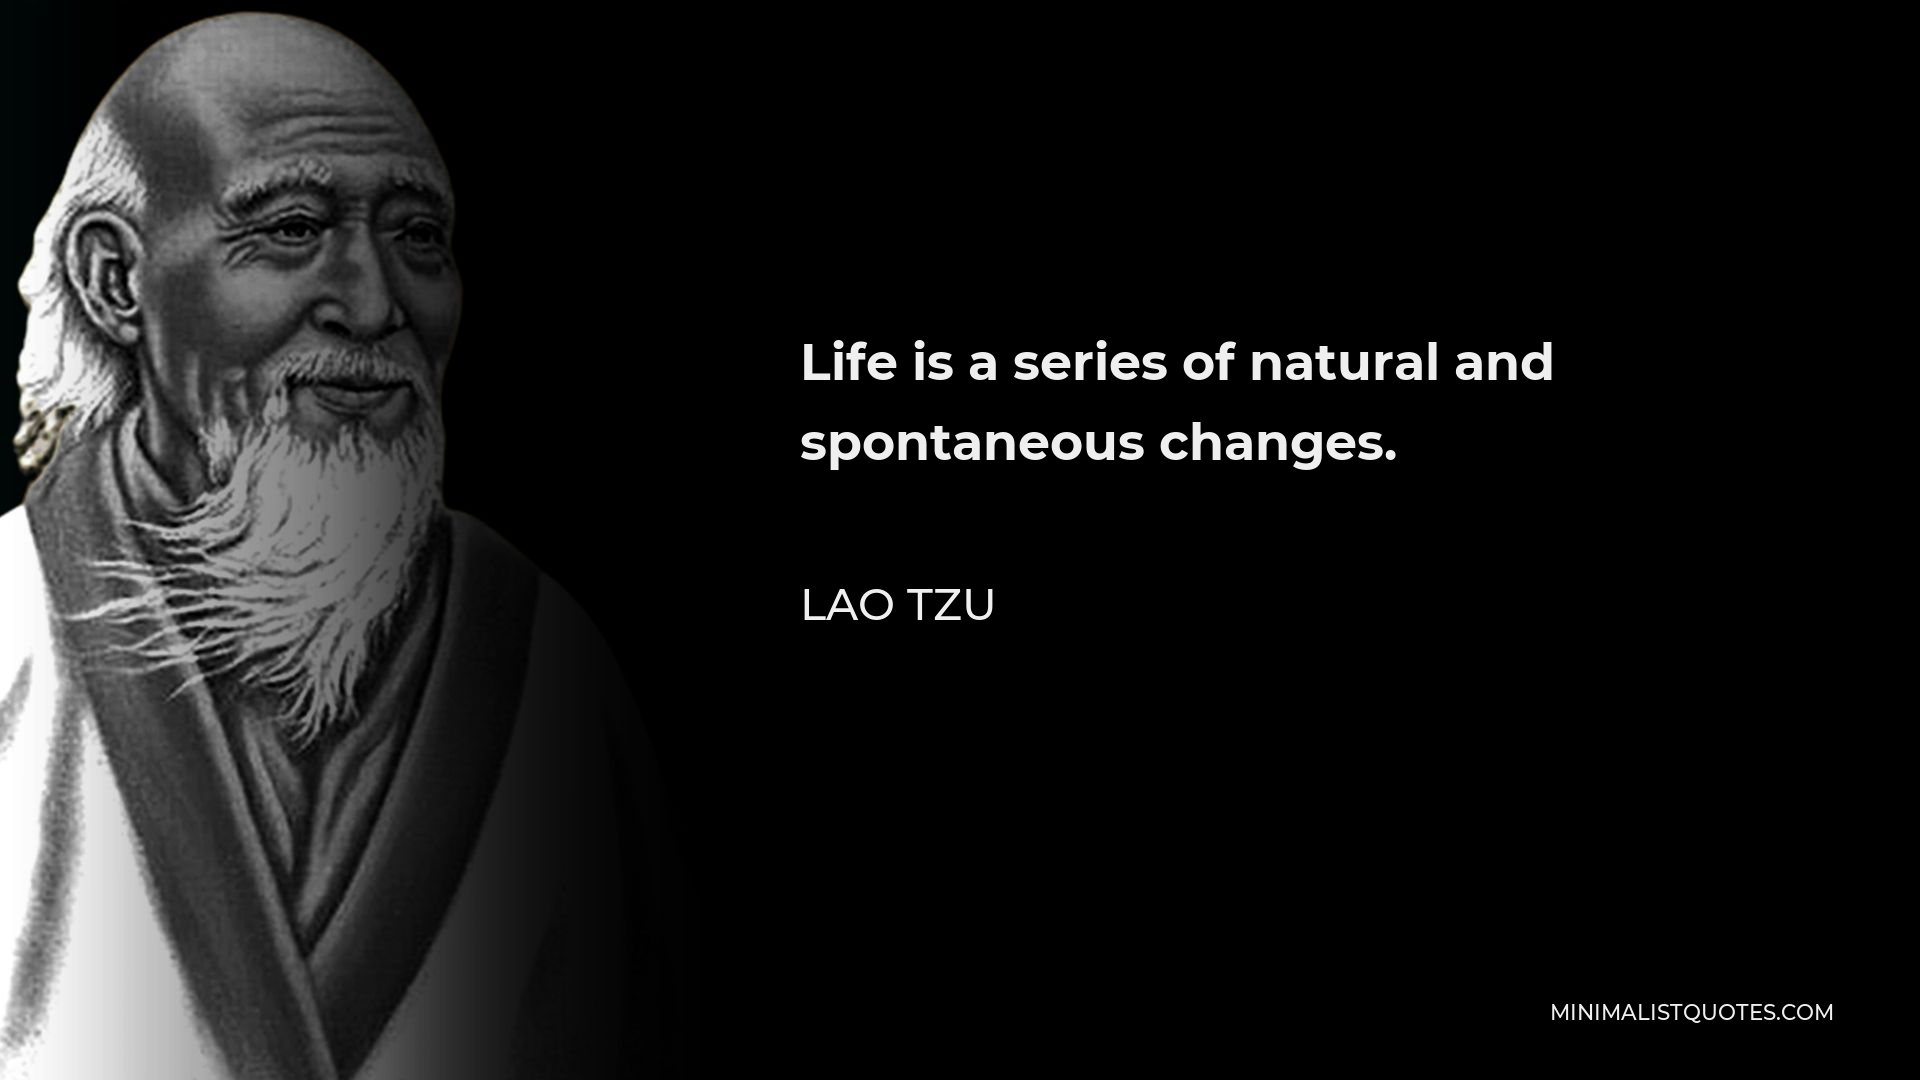 Lao Tzu Quote - Life is a series of natural and spontaneous changes.